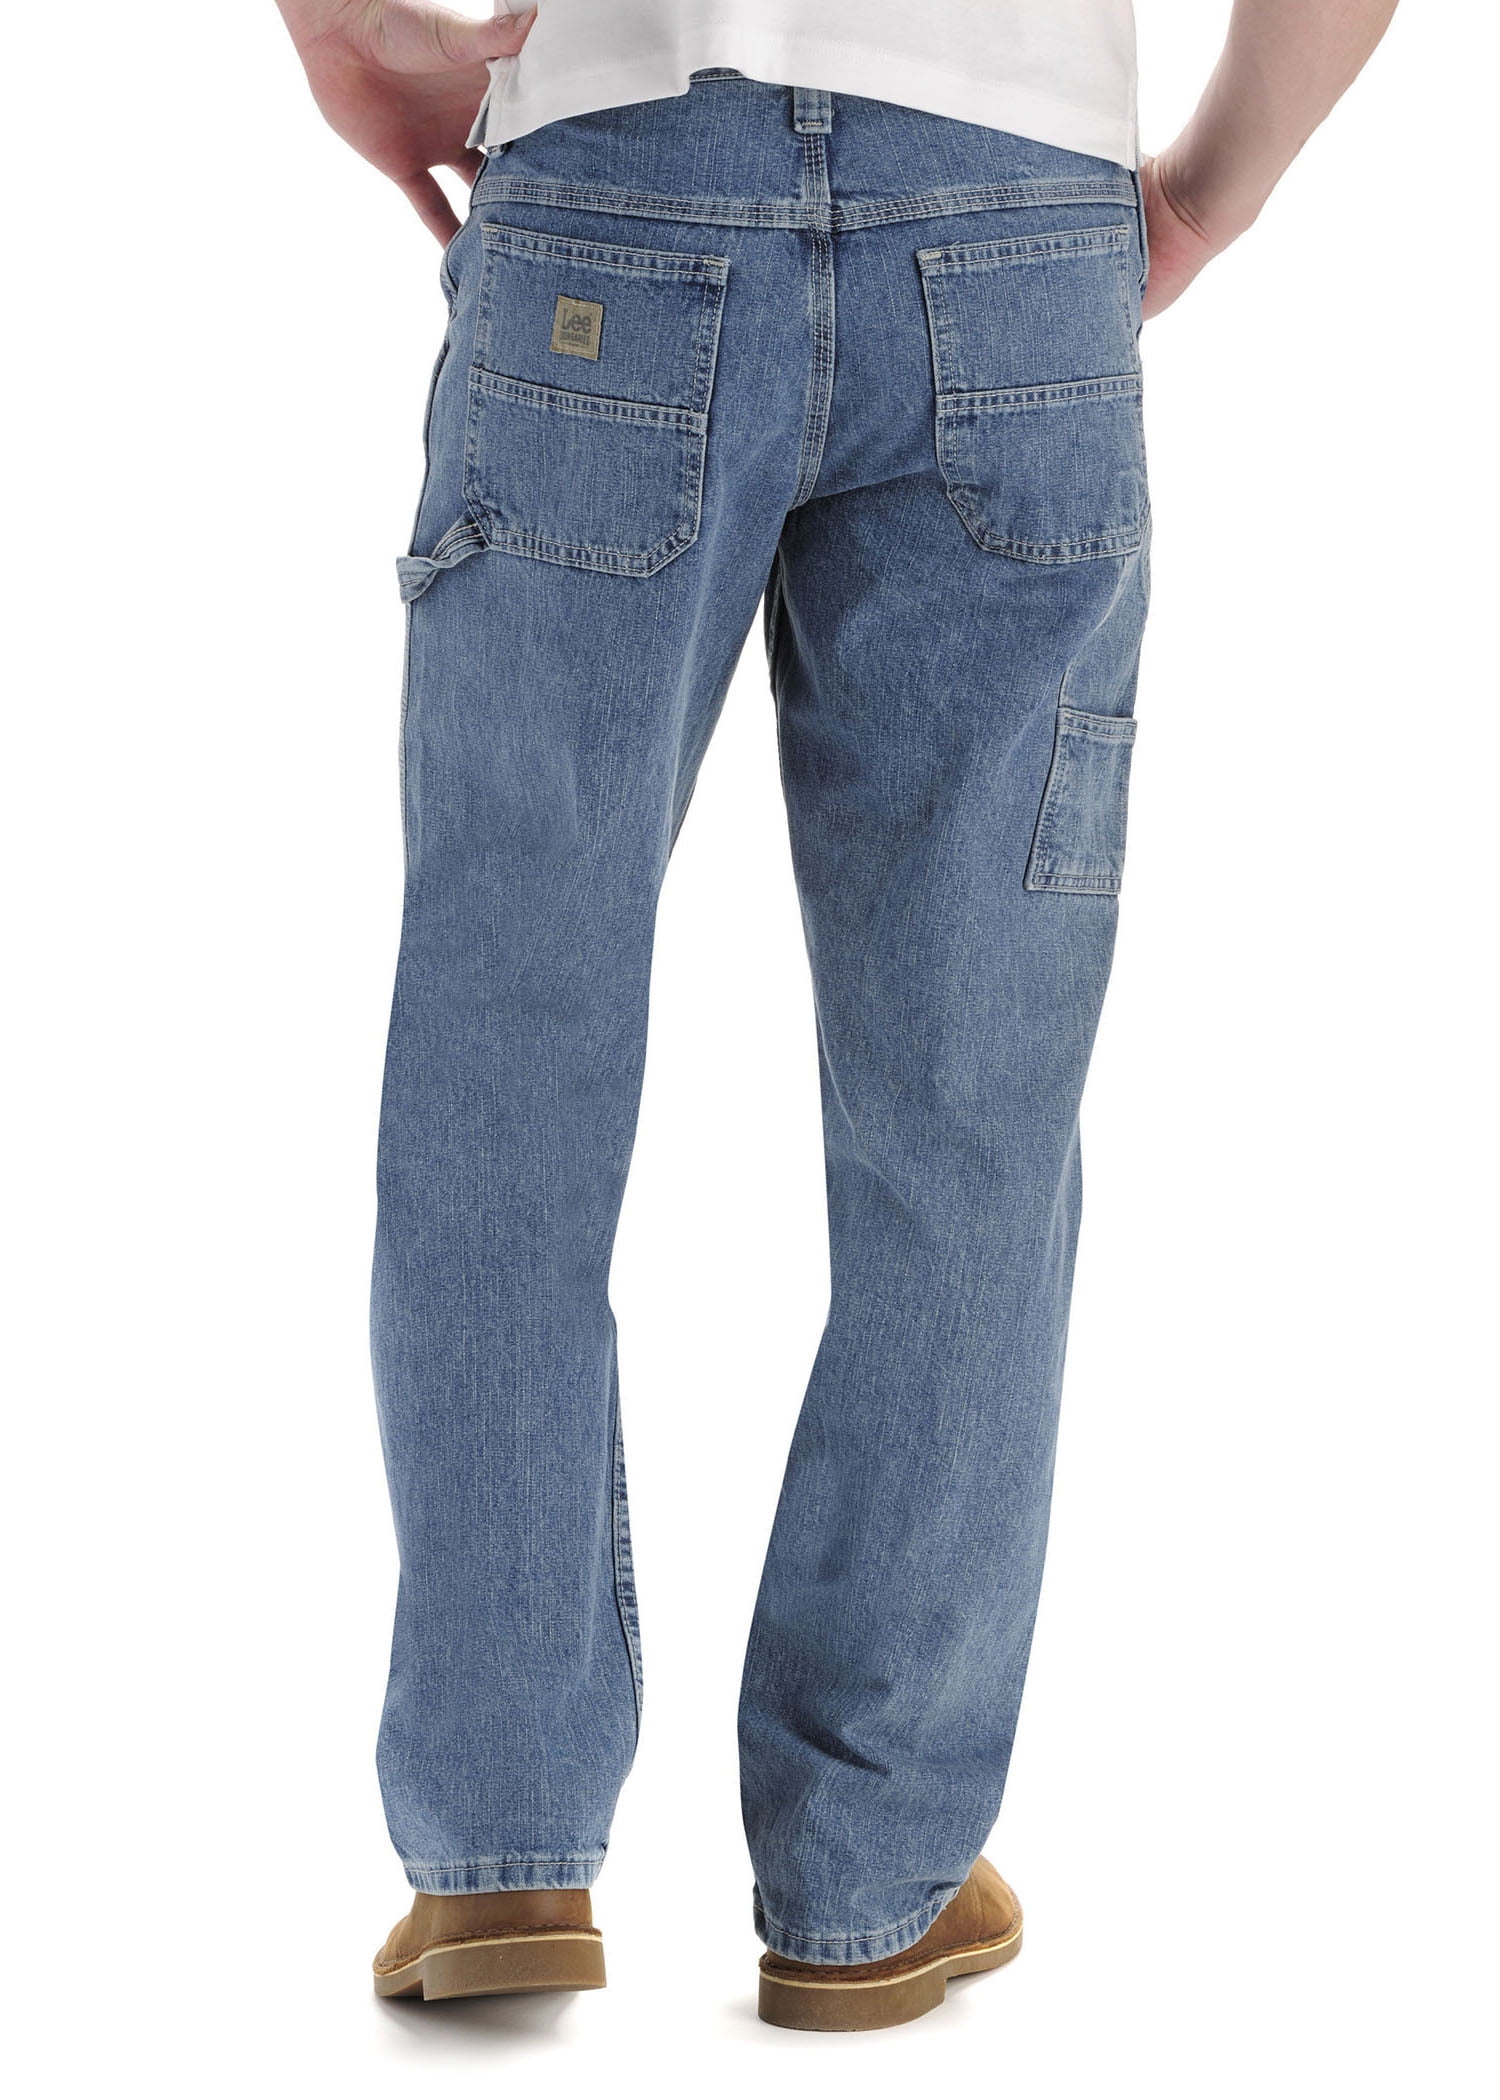 Men's Lee 101 Relaxed Fit Carpenter Jean in Dry